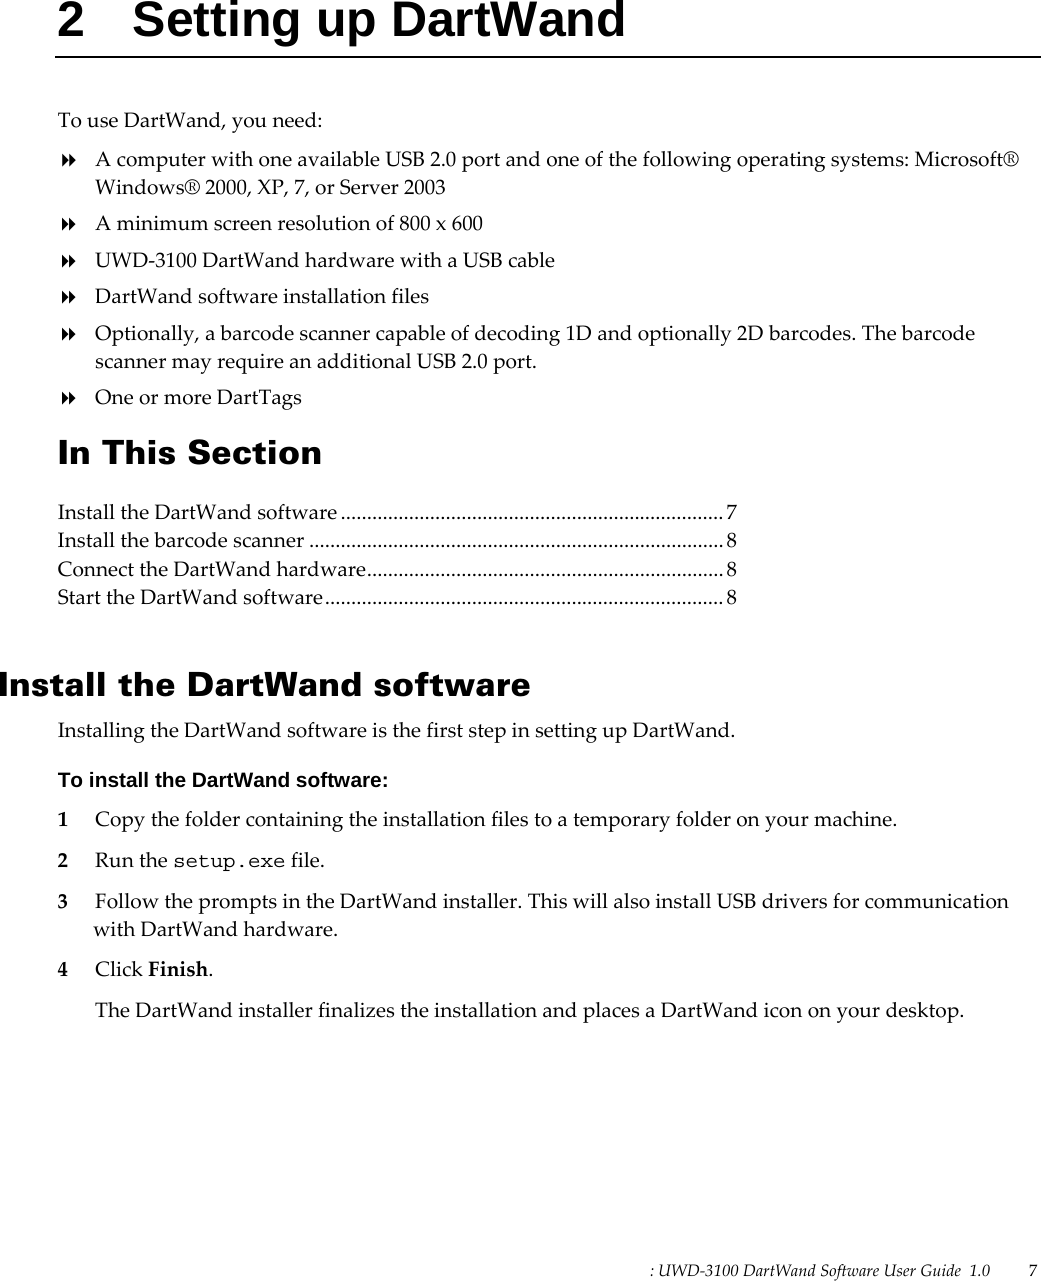 : UWD-3100 DartWand Software User Guide  1.0   7   2  Setting up DartWand To use DartWand, you need:  A computer with one available USB 2.0 port and one of the following operating systems: Microsoft® Windows® 2000, XP, 7, or Server 2003  A minimum screen resolution of 800 x 600  UWD-3100 DartWand hardware with a USB cable  DartWand software installation files  Optionally, a barcode scanner capable of decoding 1D and optionally 2D barcodes. The barcode scanner may require an additional USB 2.0 port.  One or more DartTags In This Section Install the DartWand software ......................................................................... 7 Install the barcode scanner ............................................................................... 8 Connect the DartWand hardware .................................................................... 8 Start the DartWand software ............................................................................ 8   Install the DartWand software Installing the DartWand software is the first step in setting up DartWand. To install the DartWand software: 1 Copy the folder containing the installation files to a temporary folder on your machine. 2 Run the setup.exe file. 3 Follow the prompts in the DartWand installer. This will also install USB drivers for communication with DartWand hardware. 4 Click Finish. The DartWand installer finalizes the installation and places a DartWand icon on your desktop.  